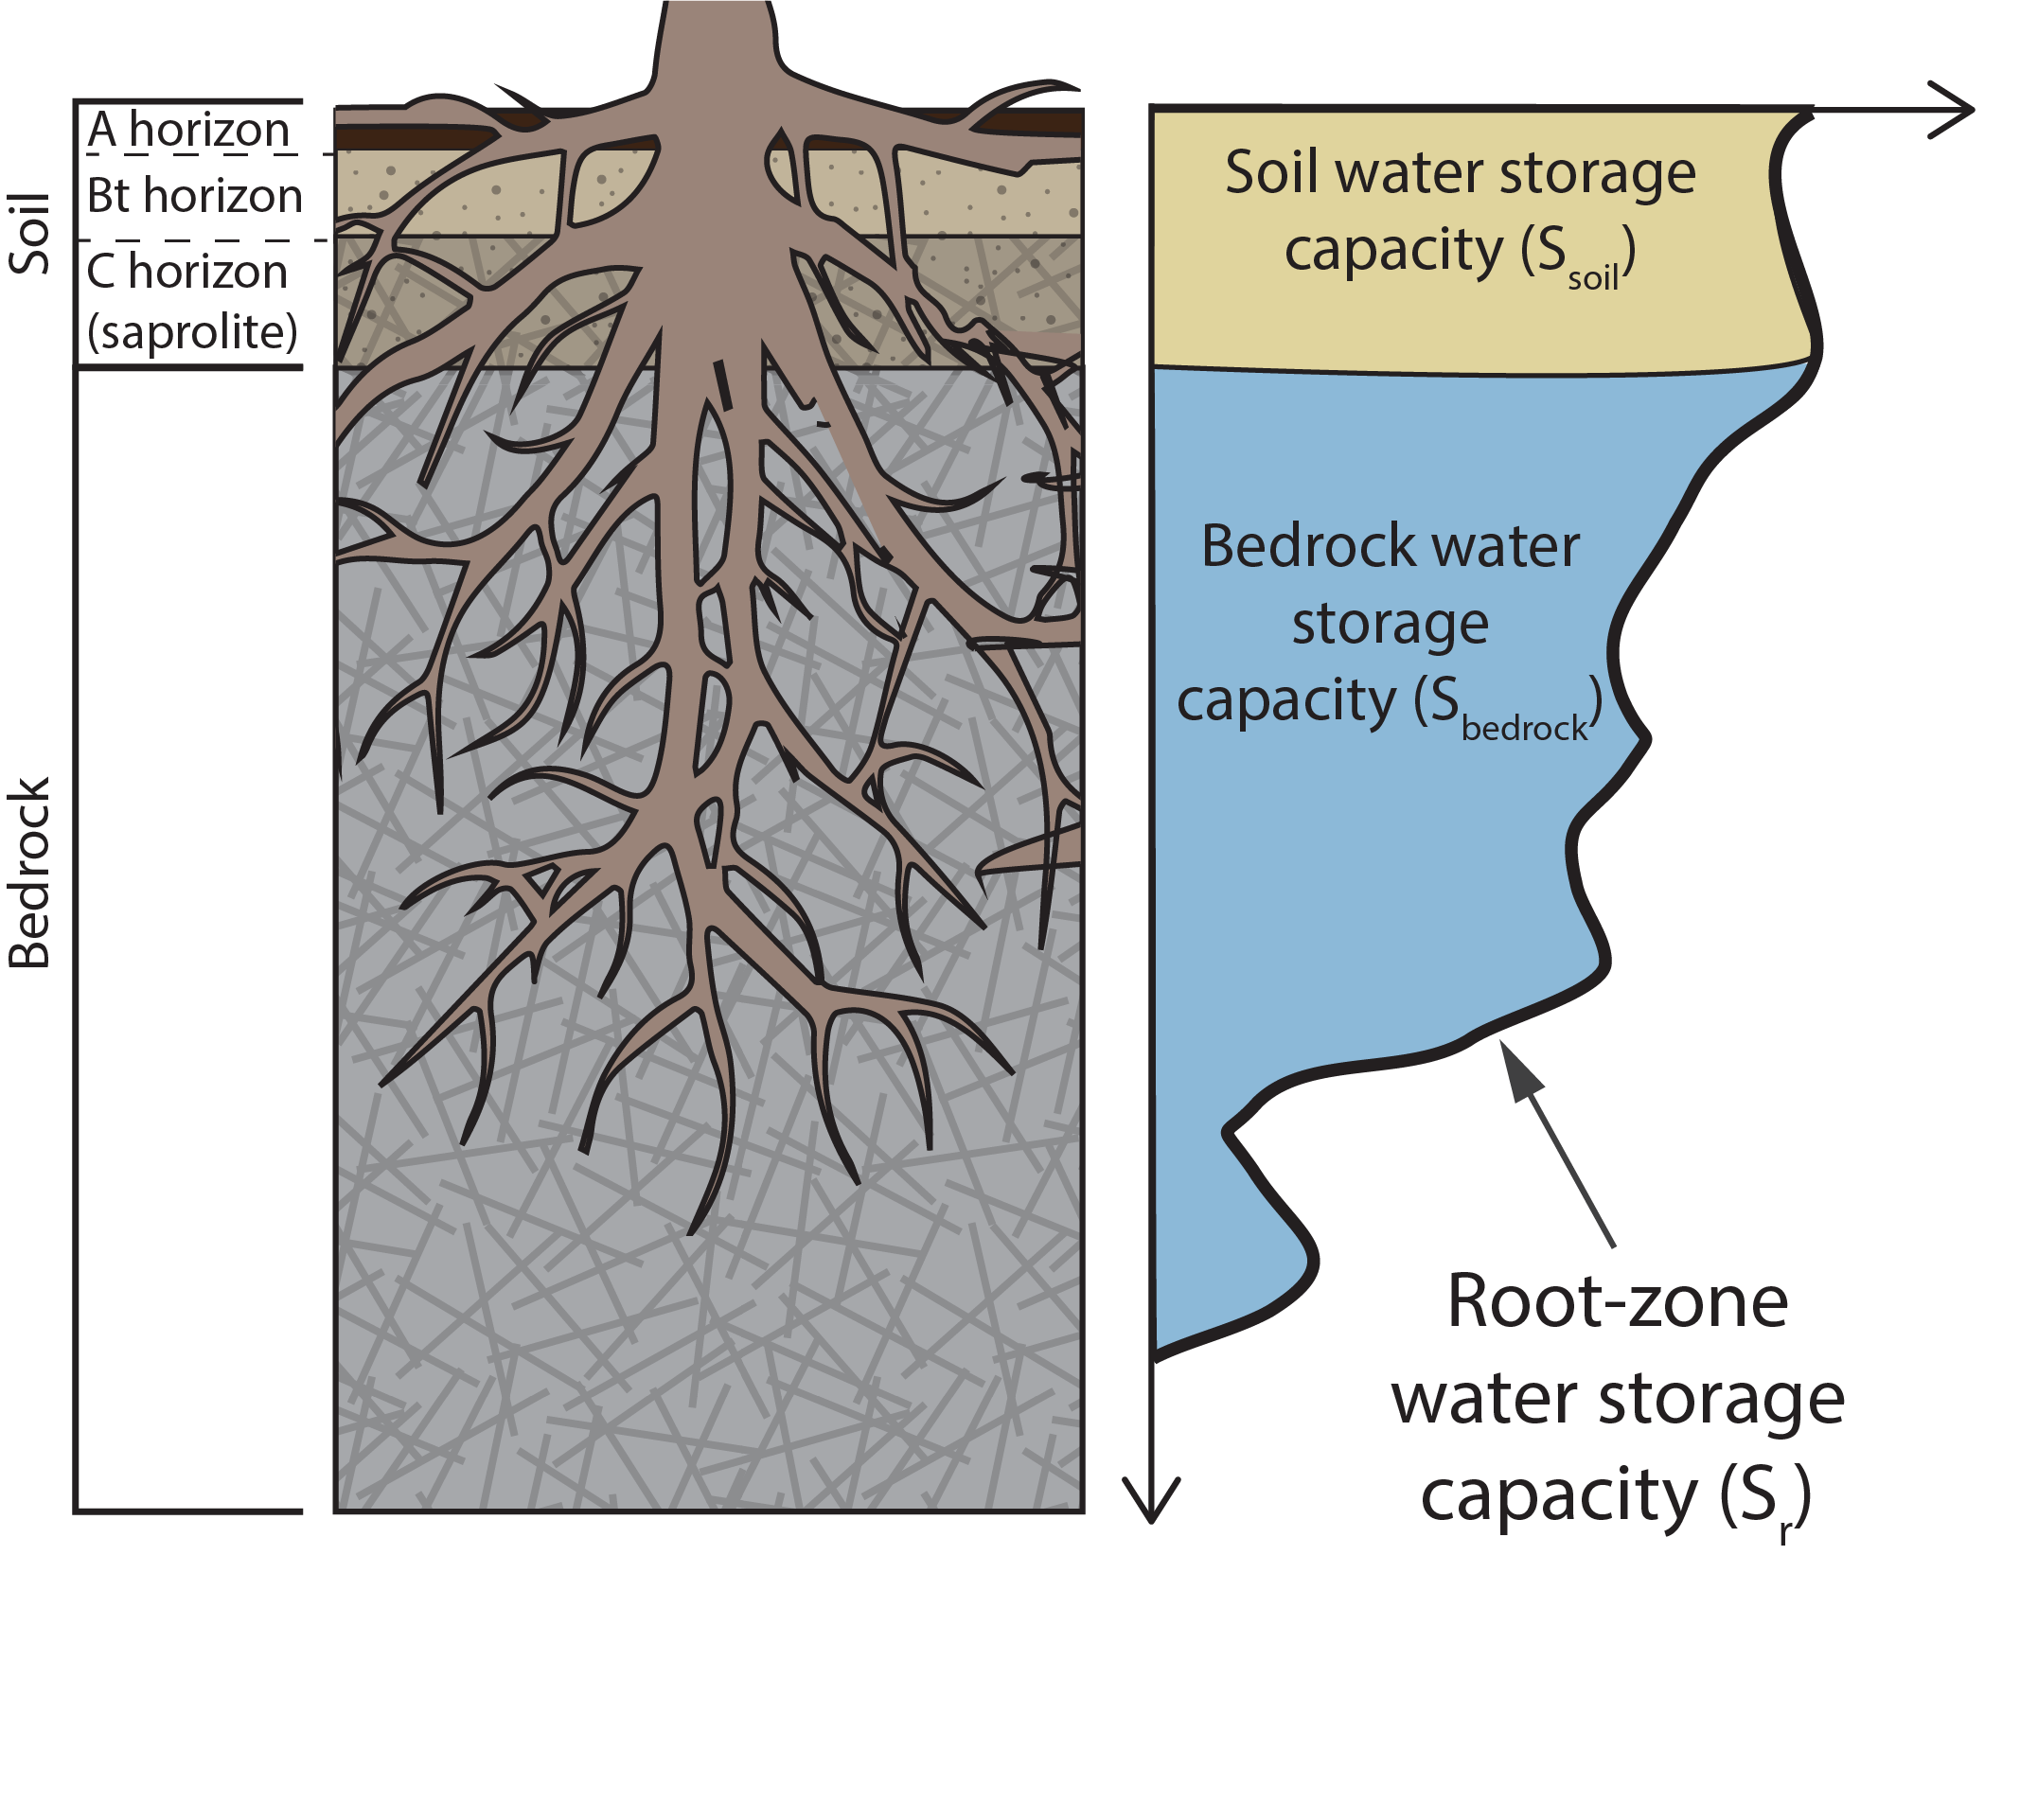 Schematic of an idealized rooting profile, where the root-zone is broken up into soil and bedrock components